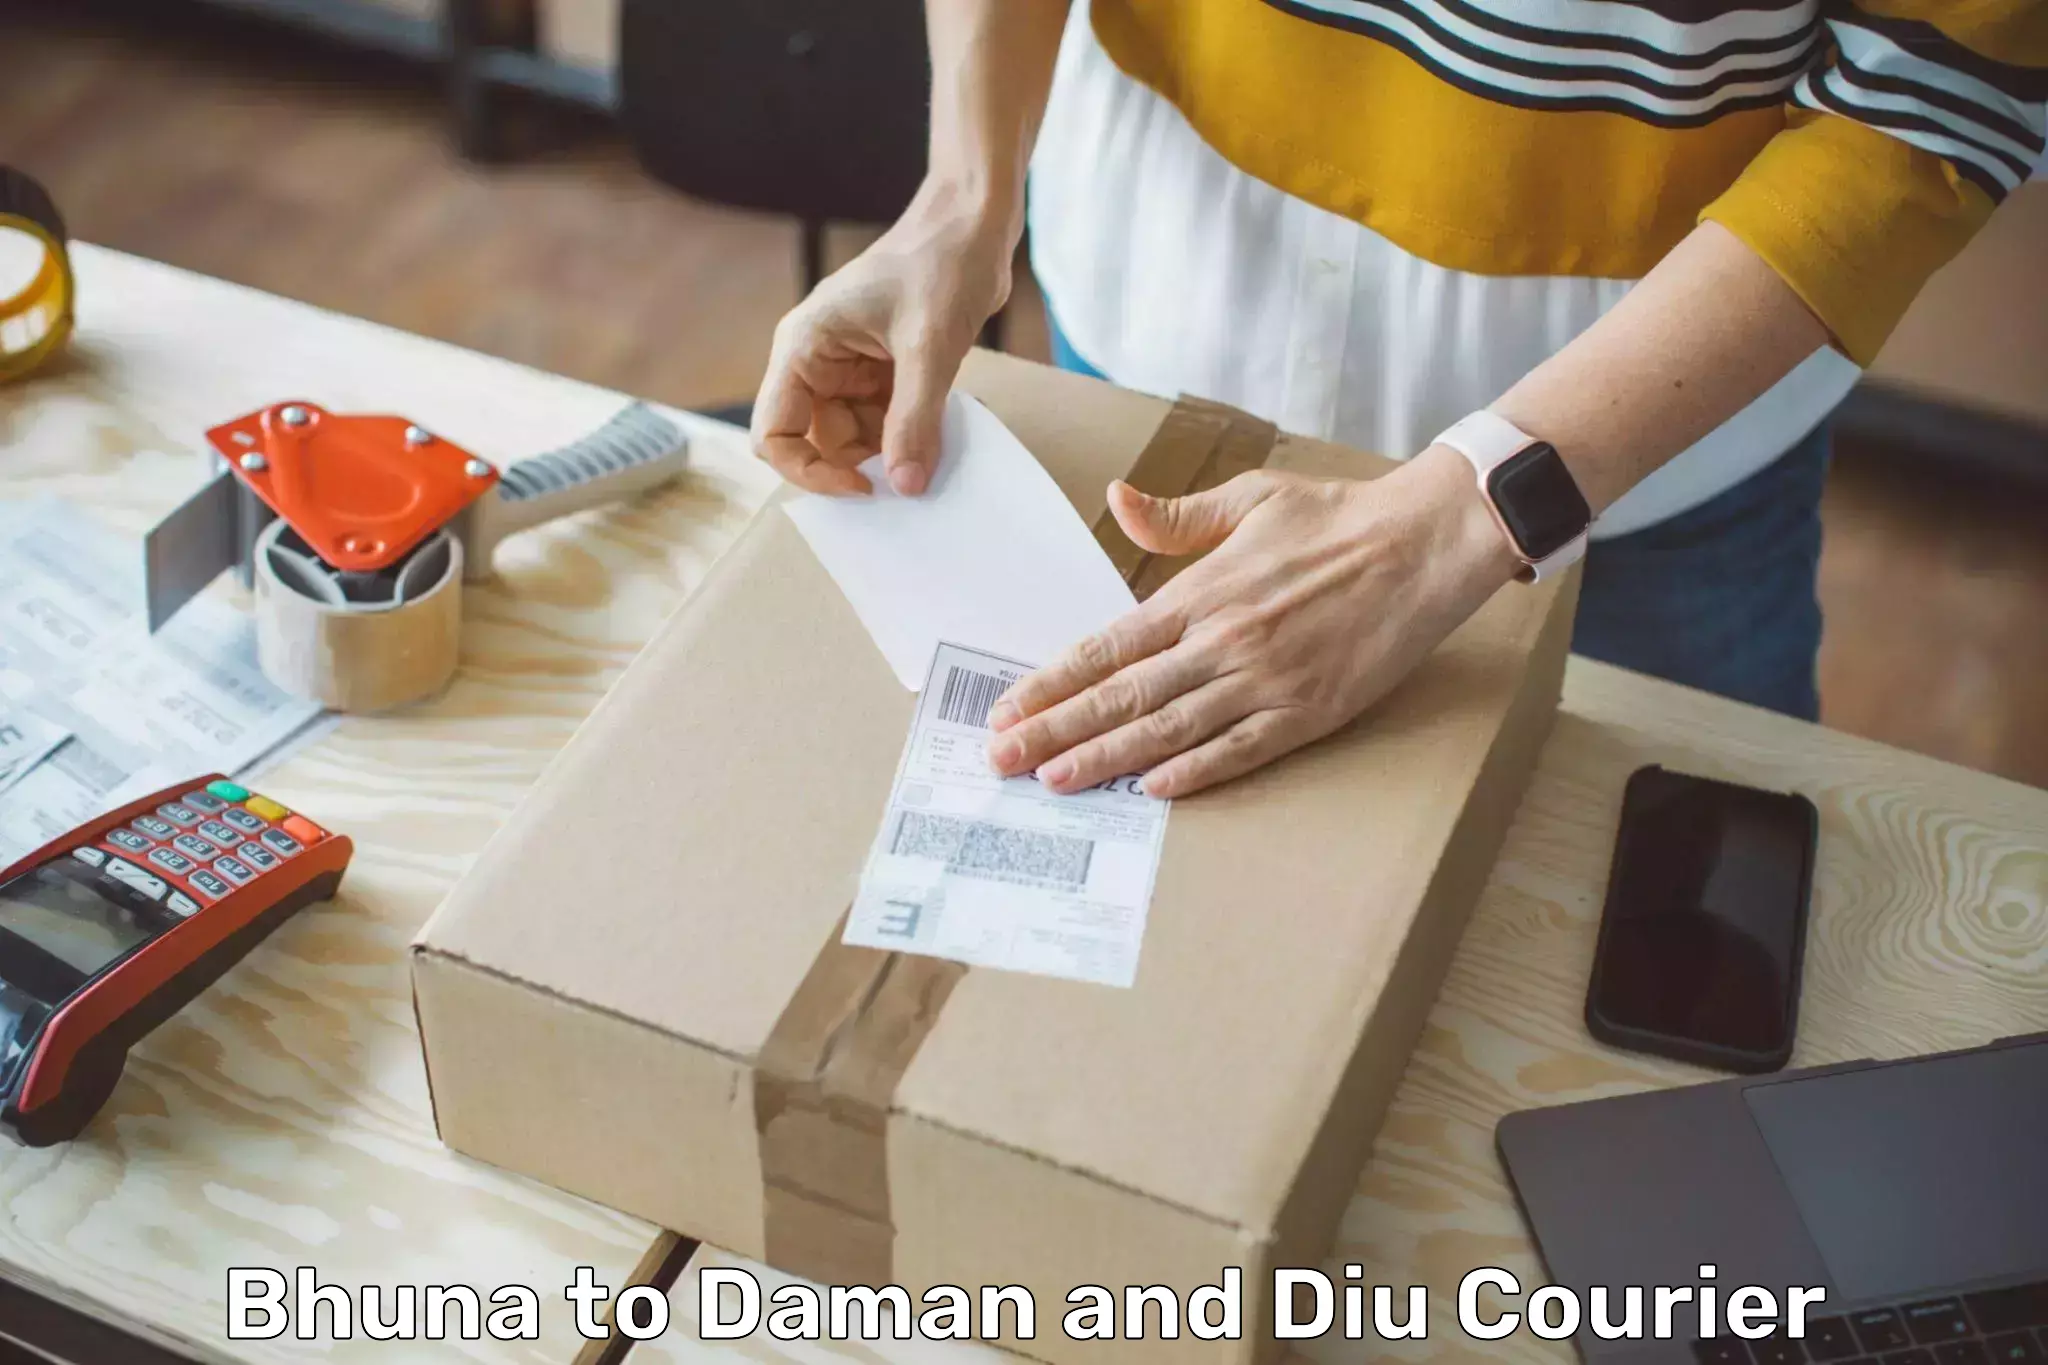 Global parcel delivery Bhuna to Daman